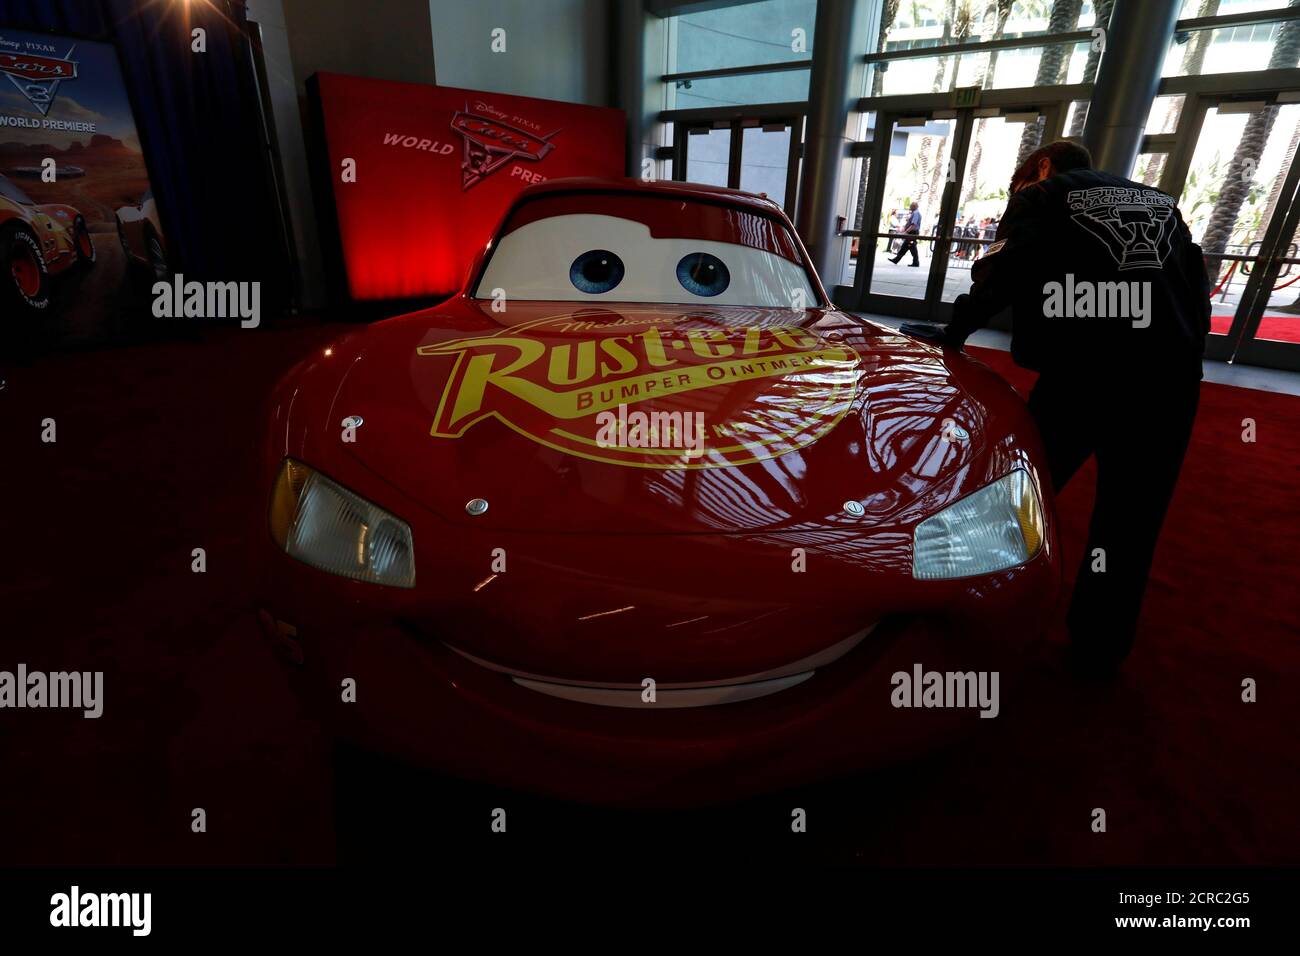 A Lightning McQueen vehicle is pictured at the premiere of 